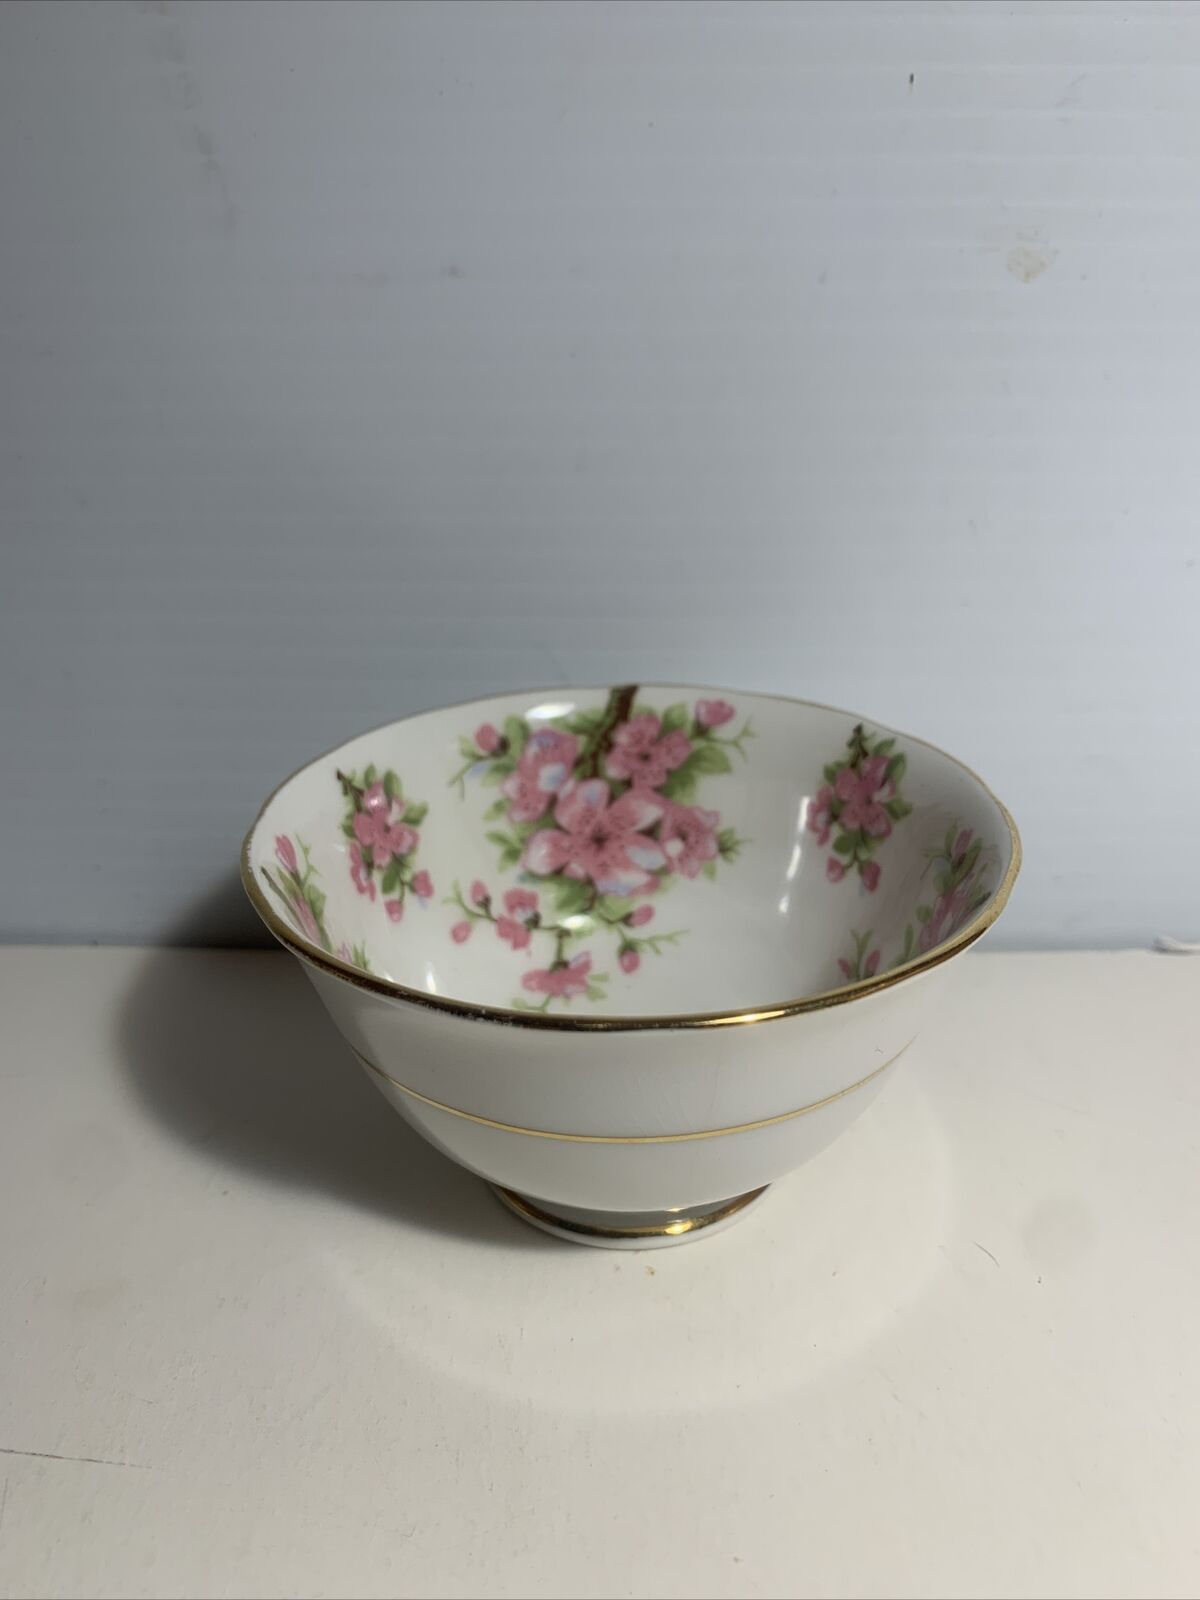 Vintage New Chelsea Open Sugar Bowl Pink Flowers Branches Ncl27 Staffs England